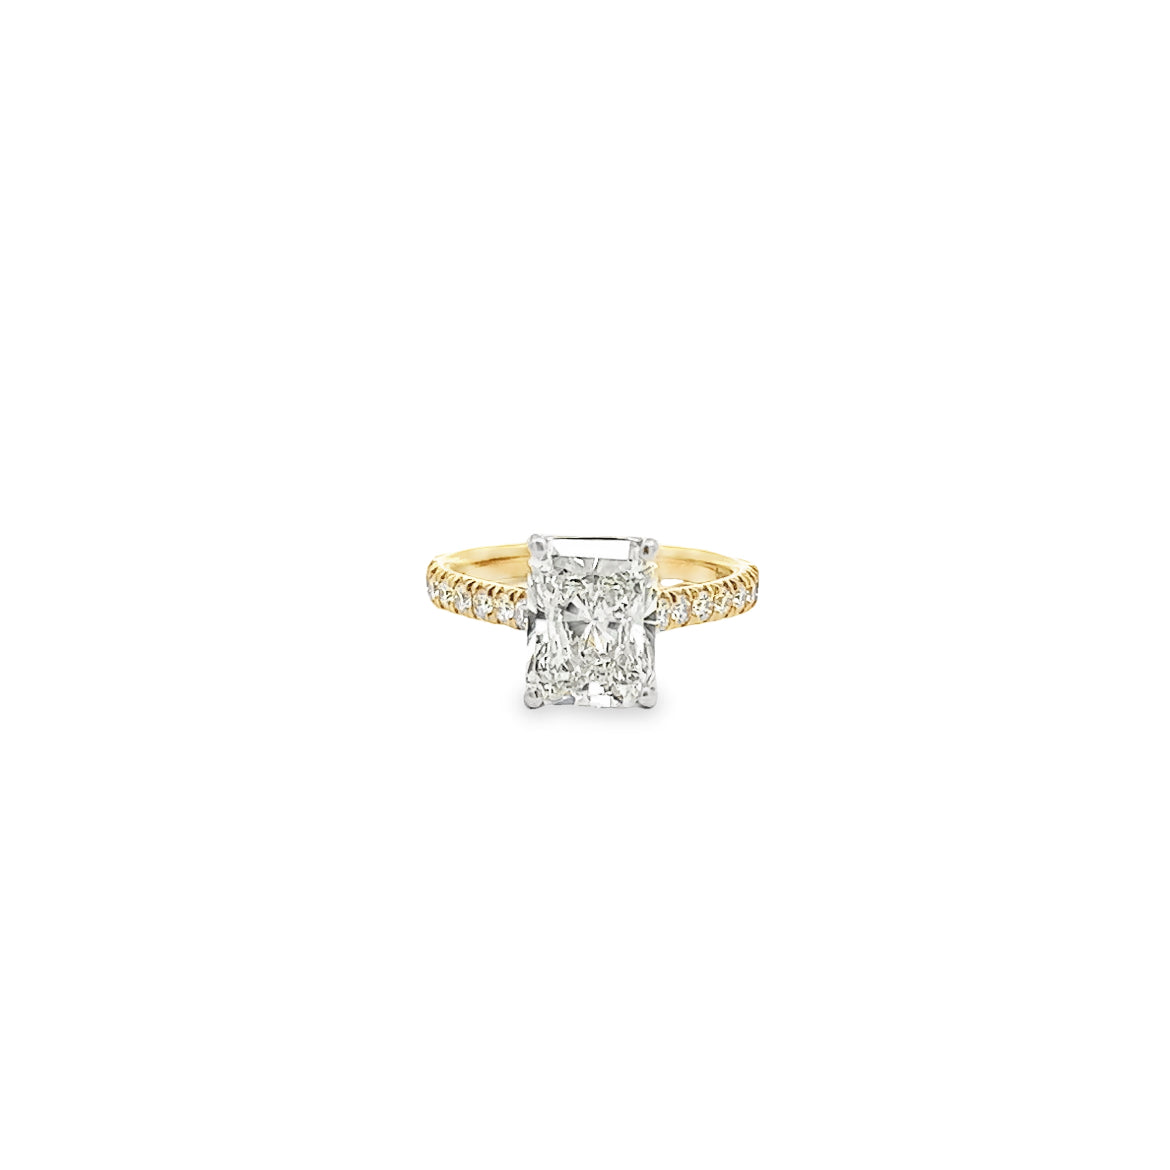 The Jewel 18K Yellow Gold Radiant Cut Engagement Ring